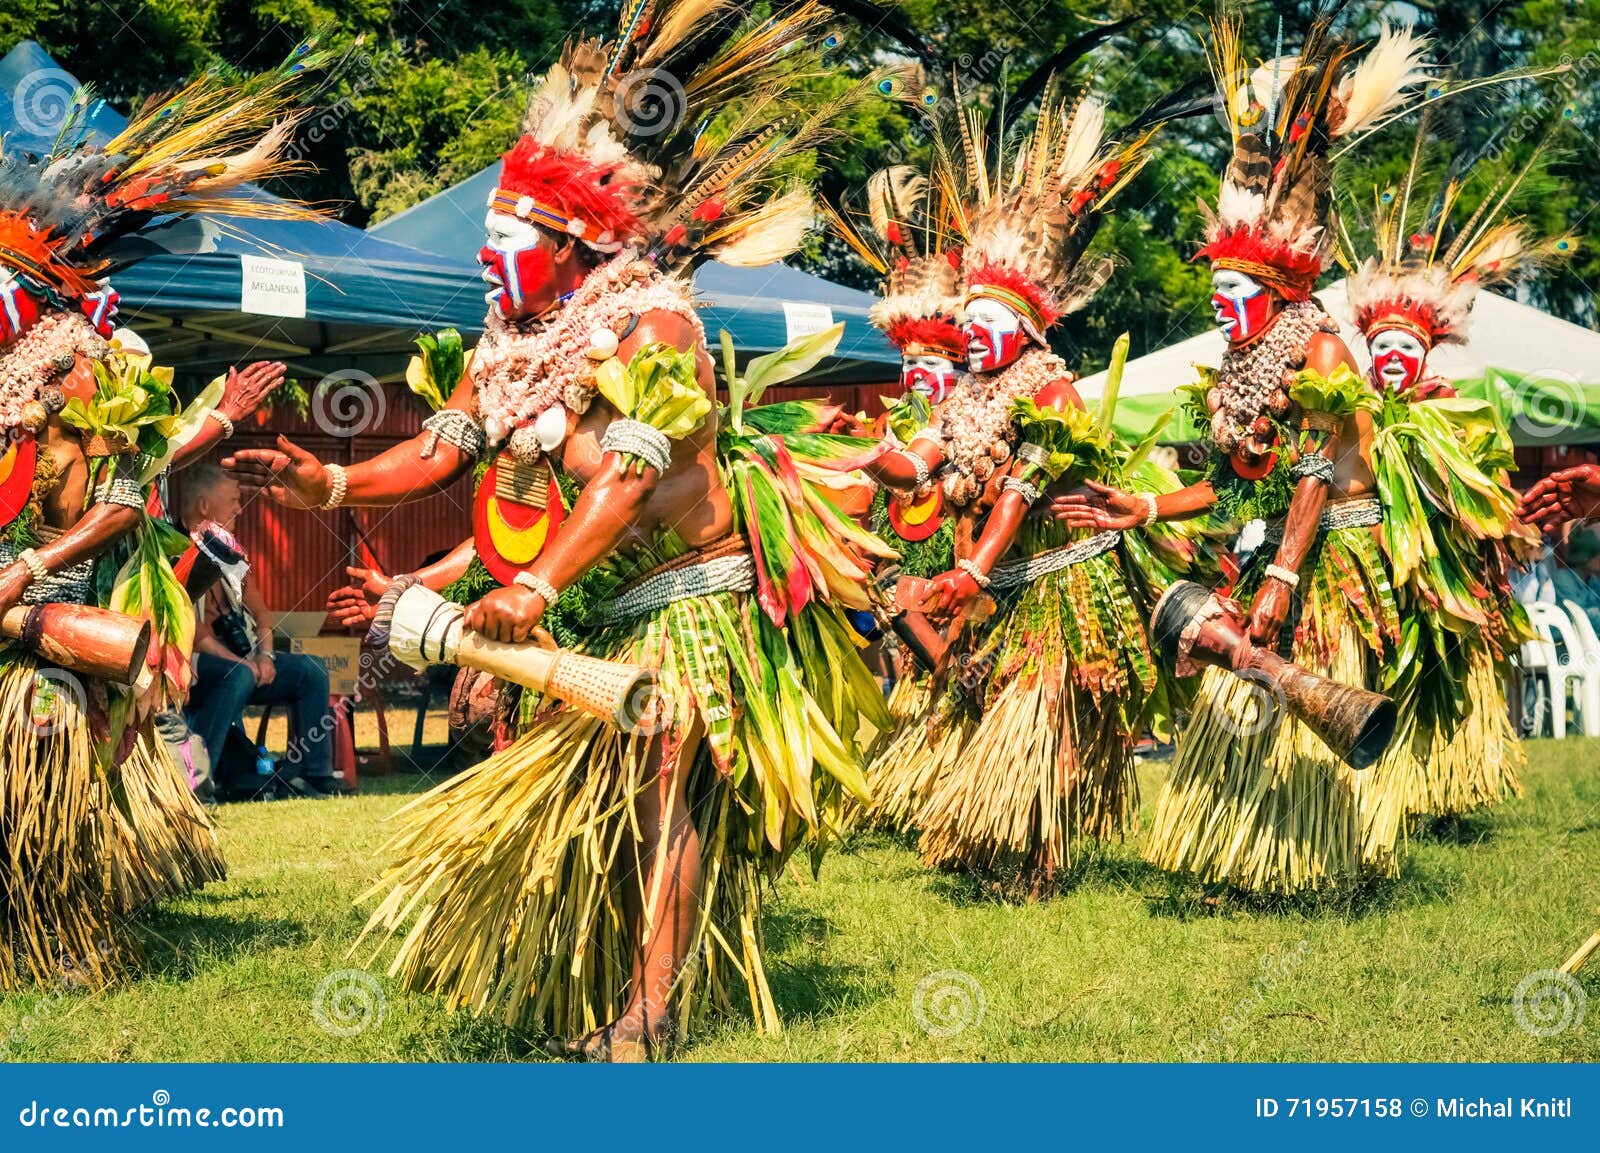 Choreography in Papua New Guinea Editorial Stock Photo - Image of event ...